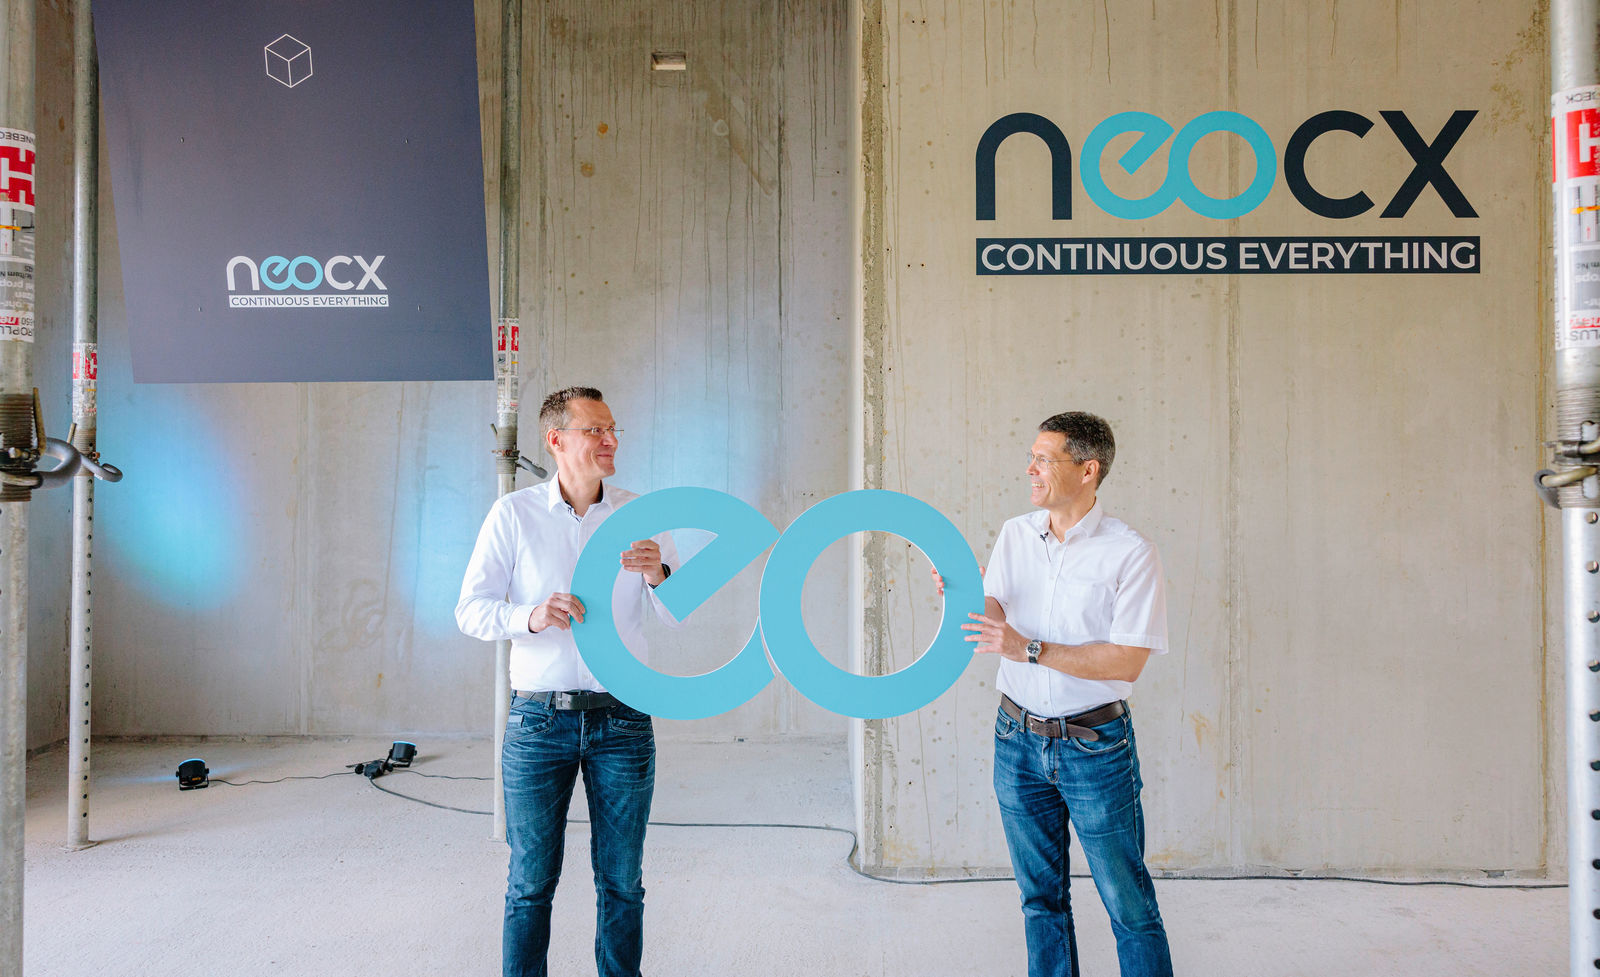 Volkswagen and TraceTronic establish neocx – a joint venture for automated software integration